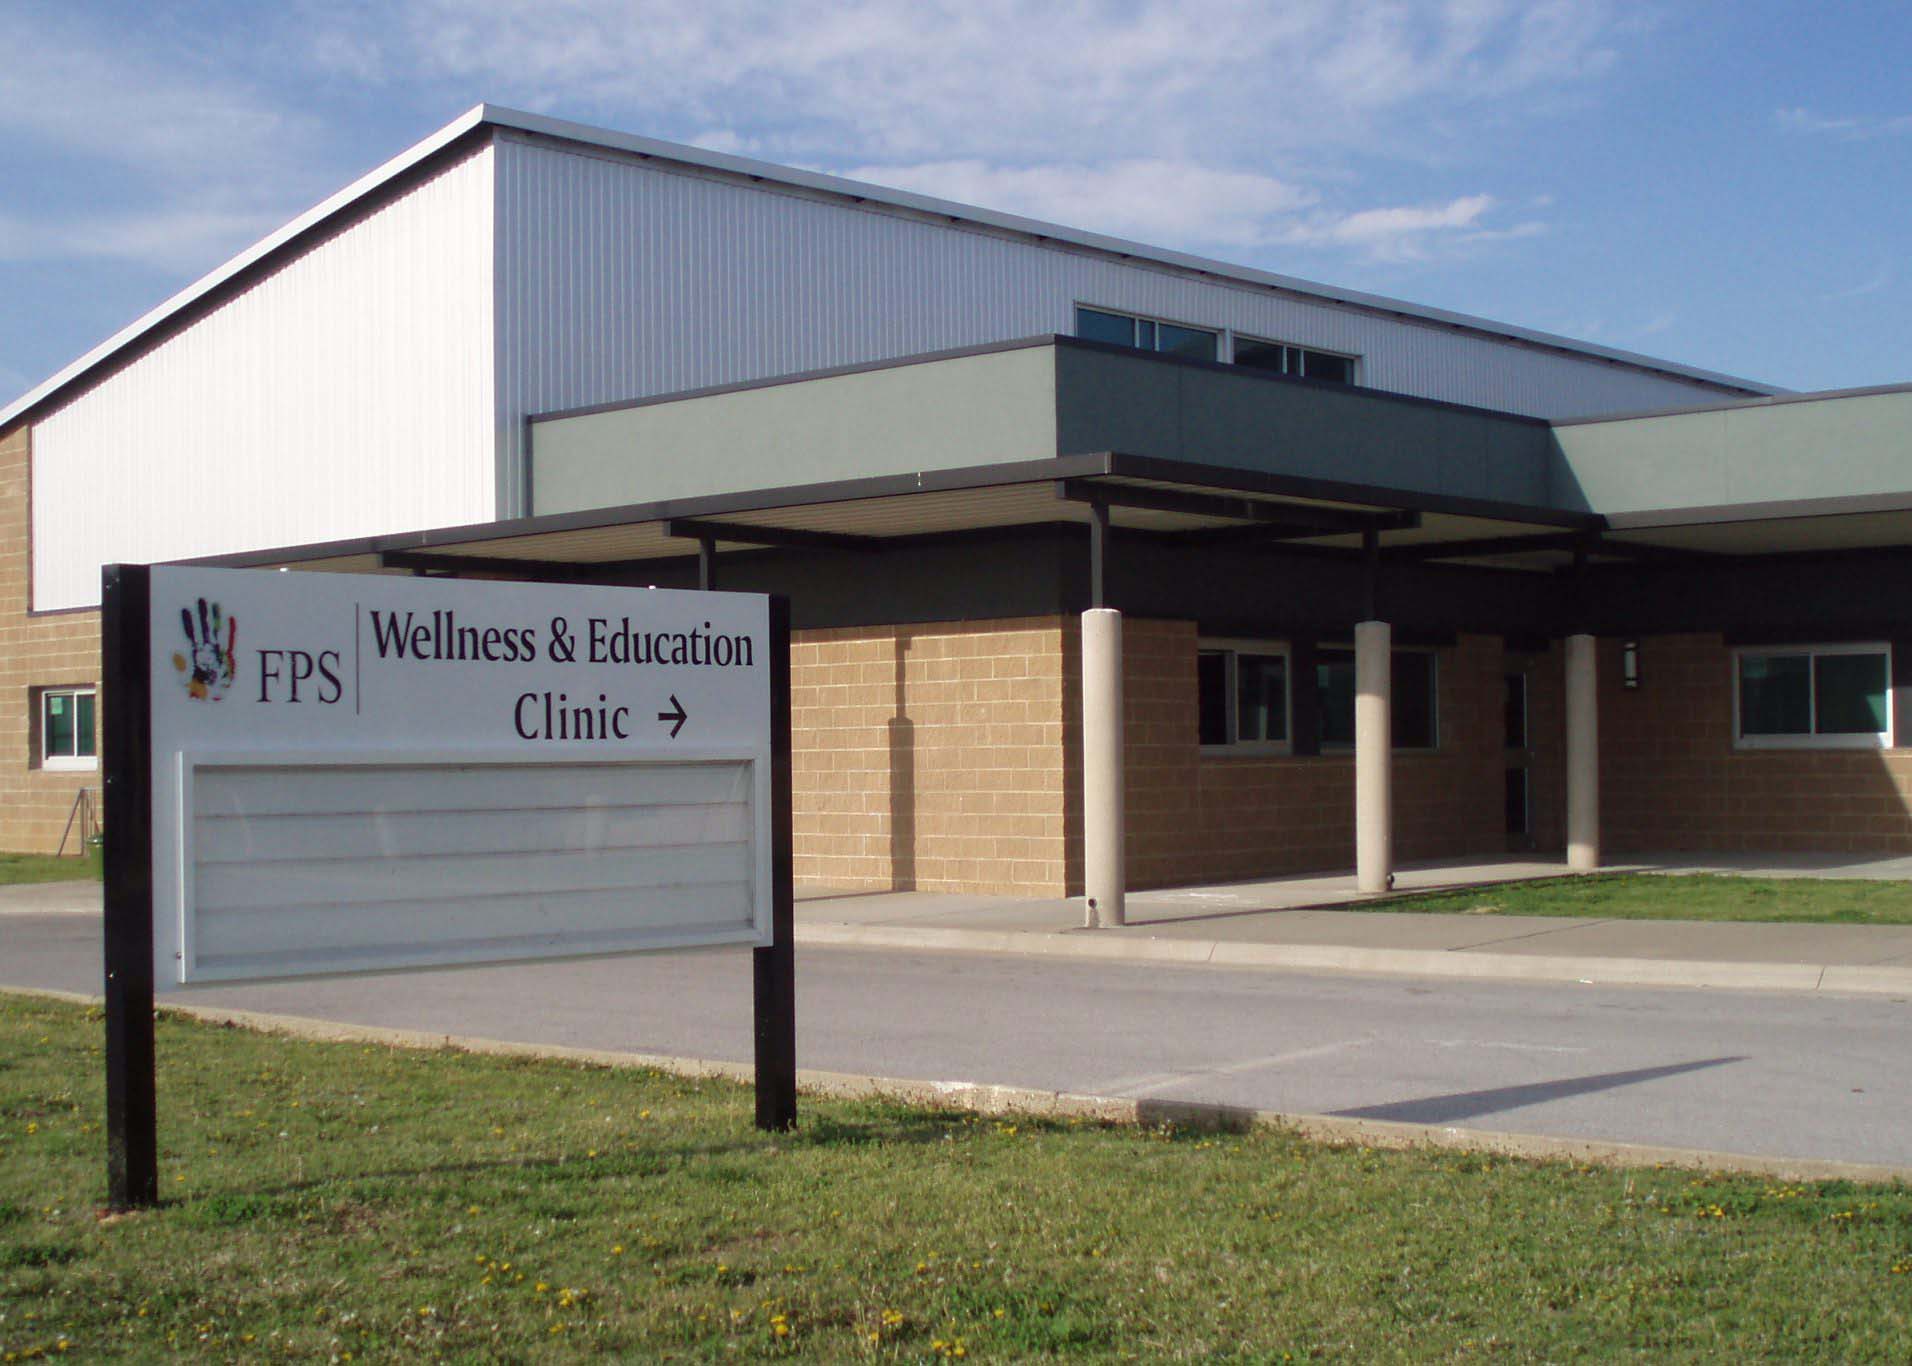 Wellness & Education Clinic at Owl Creek building